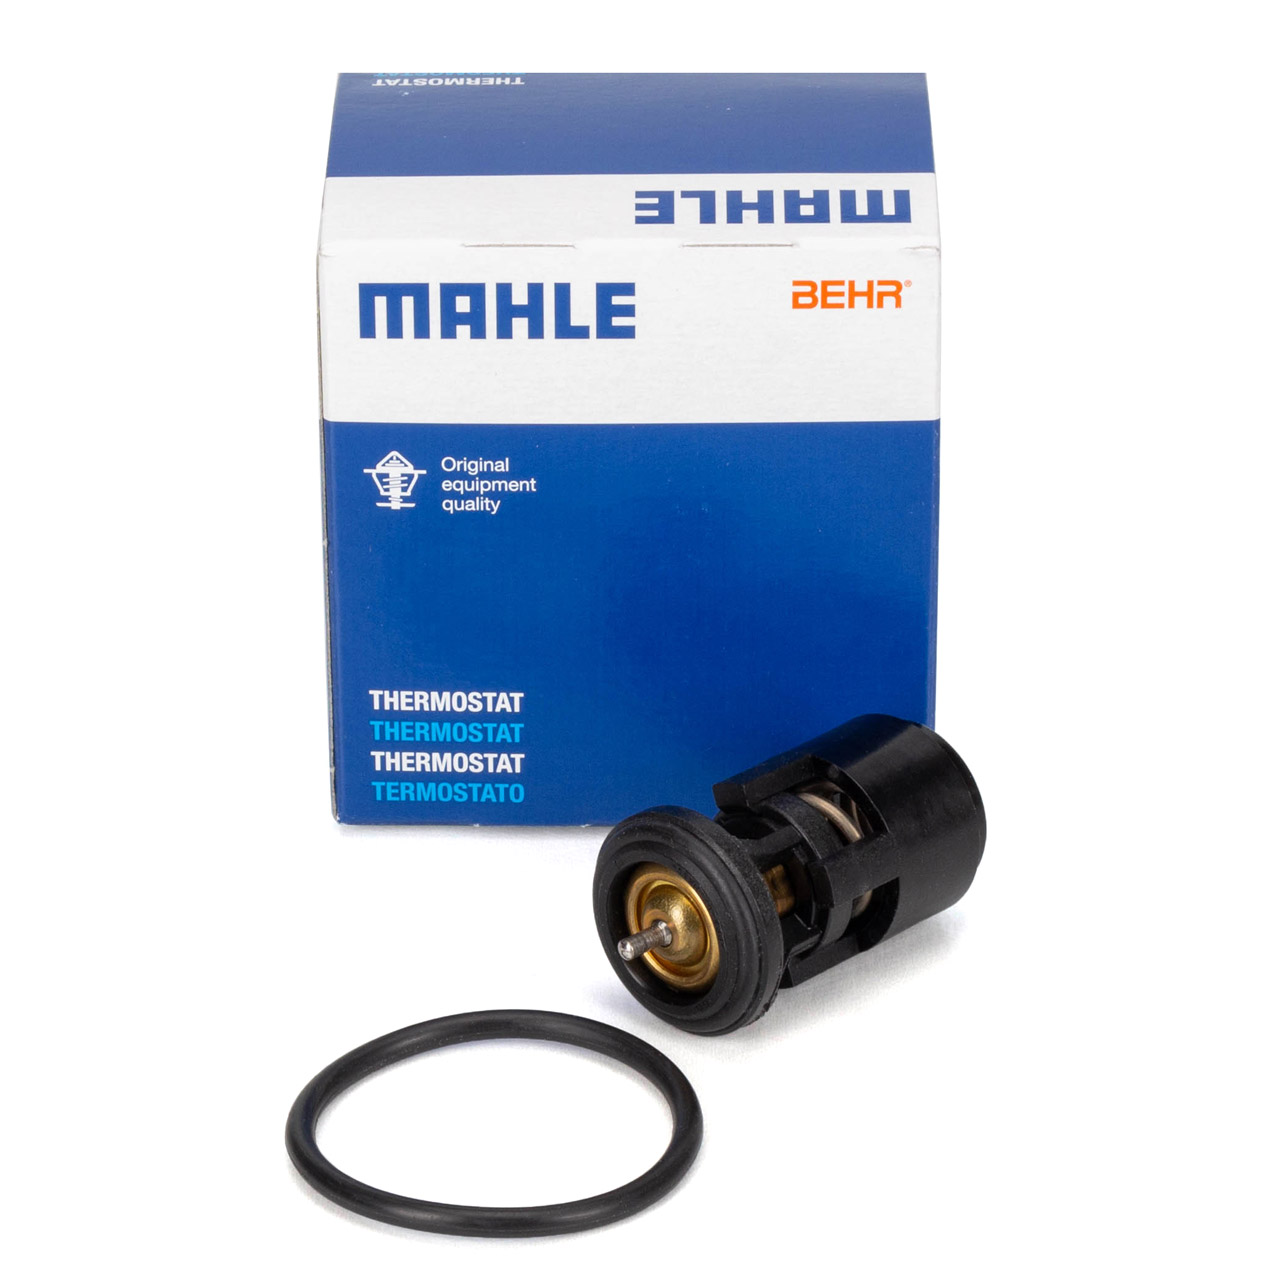 https://www.ws-autoteile.com/img/MAHLE_THERMOSTAT_KUEHLMITTEL_TX4187D_A18013W022_202302201522_99.jpg